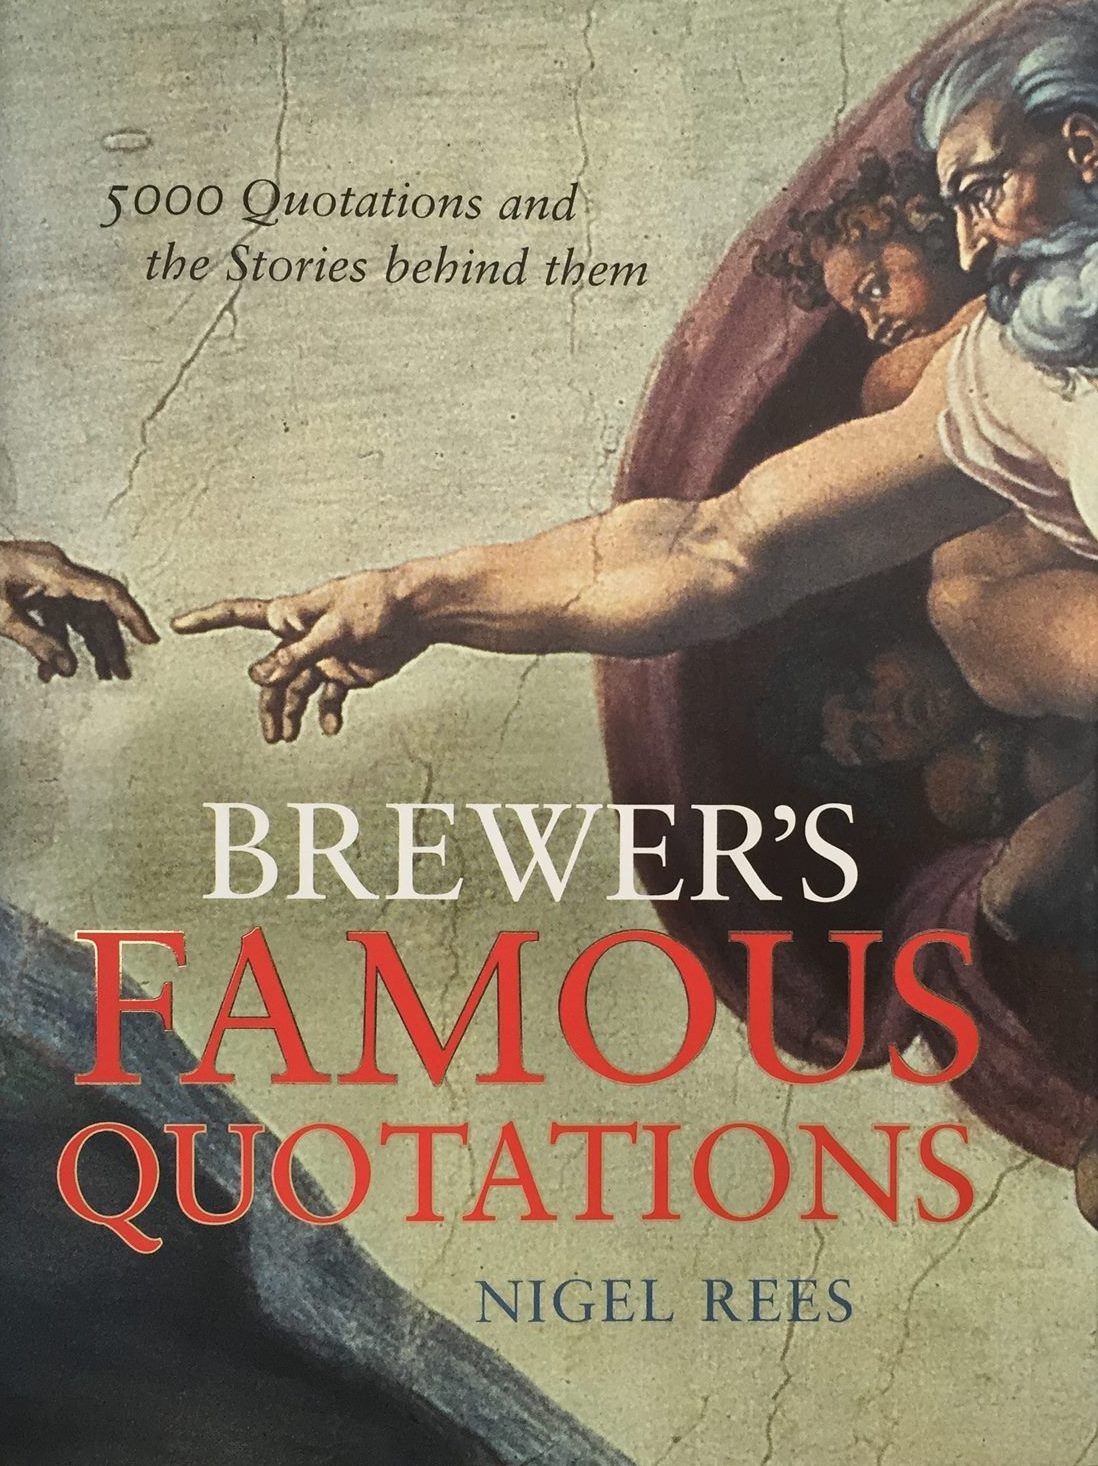 BREWER'S FAMOUS QUOTATIONS: 5000 Quotations and The Stories Behind Them